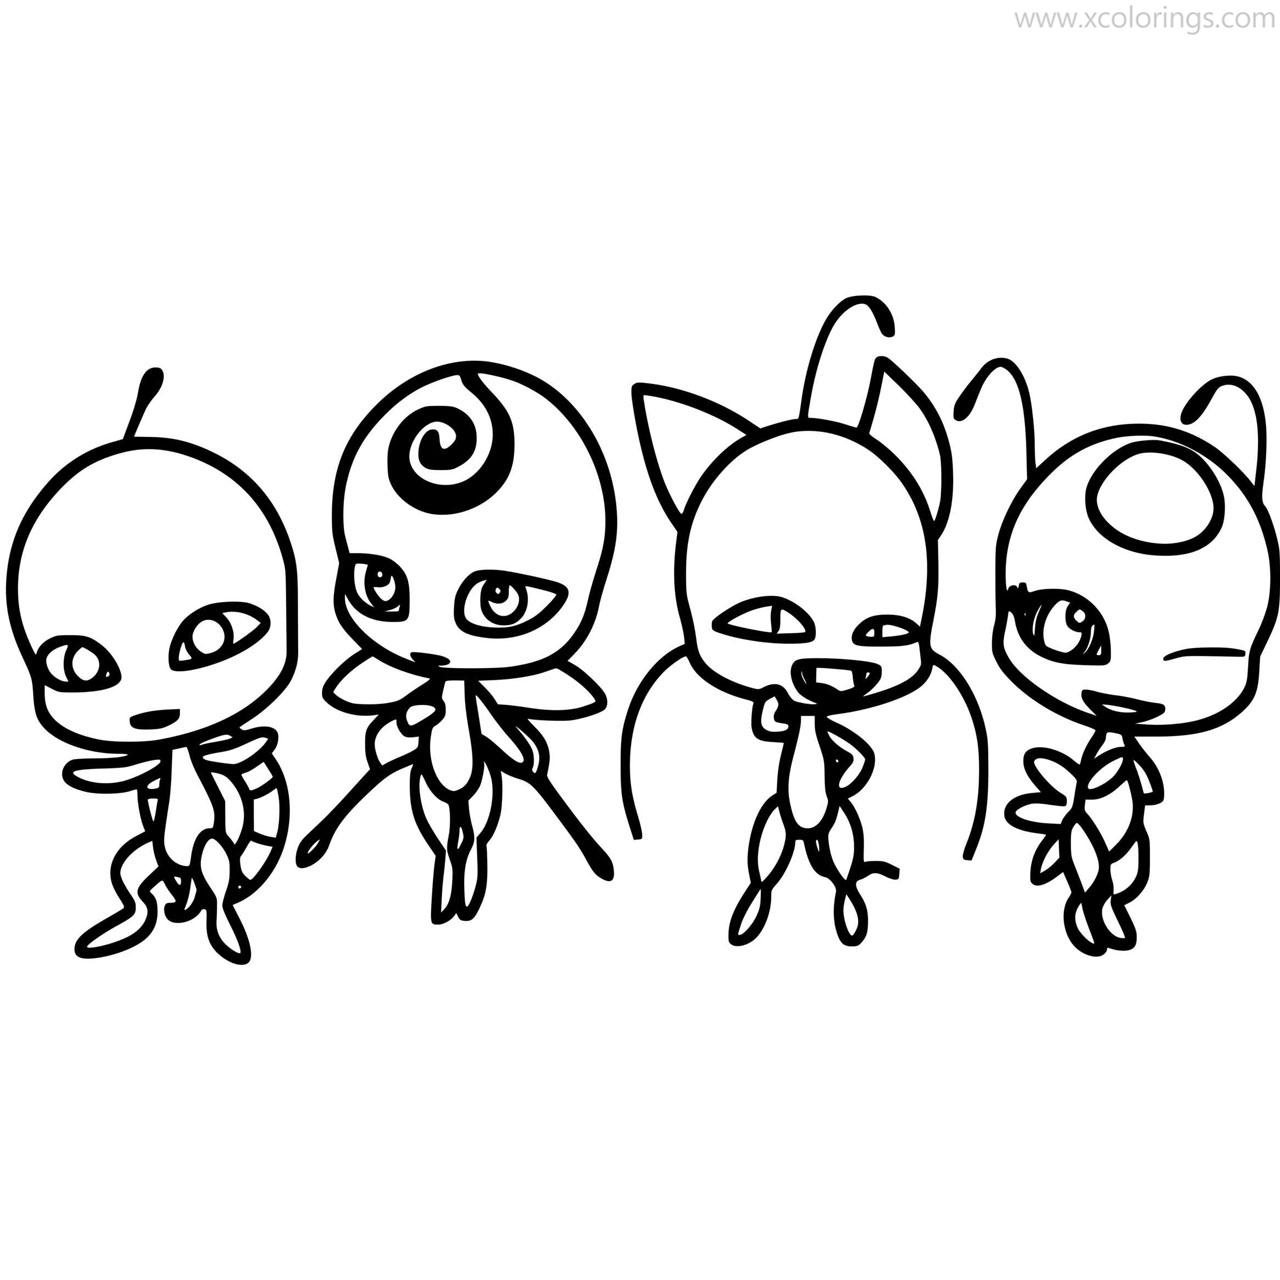 Free Kwamis from Miraculous Ladybug Coloring Pages printable